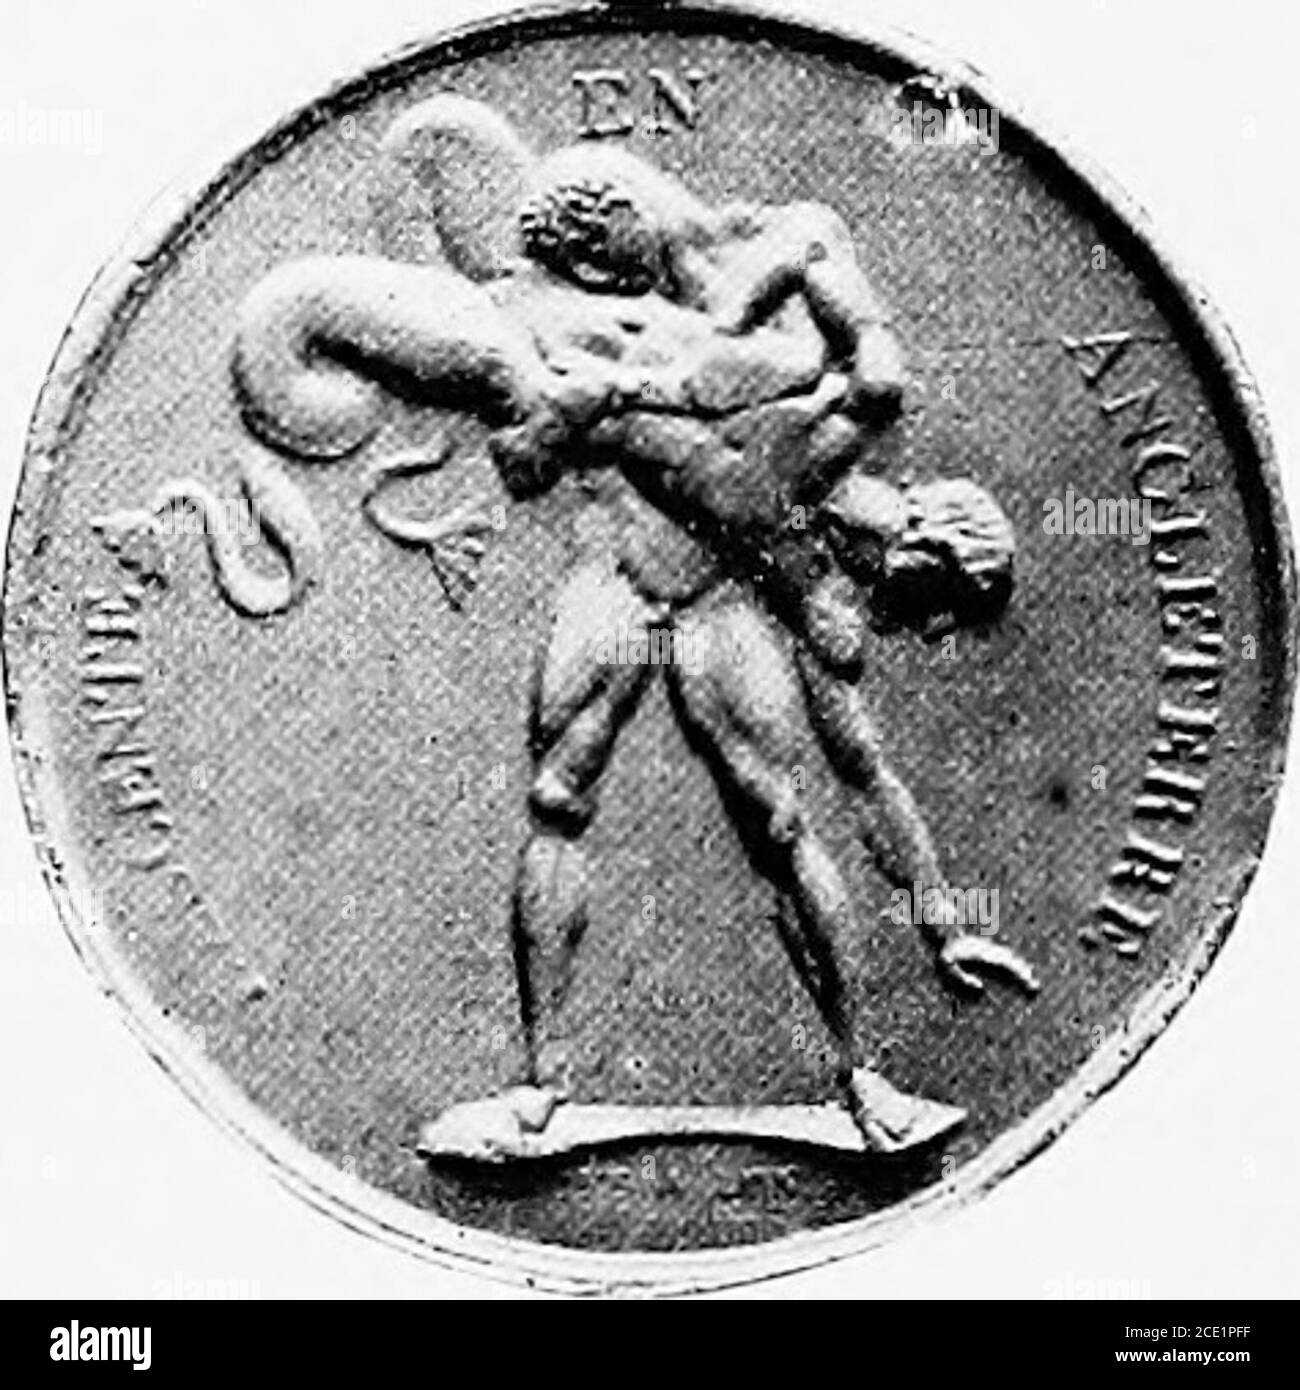 . The life of Napoleon I, including new materials from the British official records . Medal stkiok to commemorate the intended InasionFROM Boulogne. Ol2i. Napoleon. ReT. Hercules crushing [he sea monster.Deseente en Aite^leterre—Prappee a- Landres en 1804. MEDAL.S.From Delarochcs Trcsor cle Xuinisniatitiuc * and Ivlwards Napoleon Medals.vol. I. ^i THE BOULOGNE FLOTILLA 465 pinnaces and row-boats were ready to attack the flotillabefore it could attempt the disembarkation of horses,artillery, and stores, and that 180,000 regulars and militia,aided by 400,000 volunteers, were ready to defend our Stock Photo